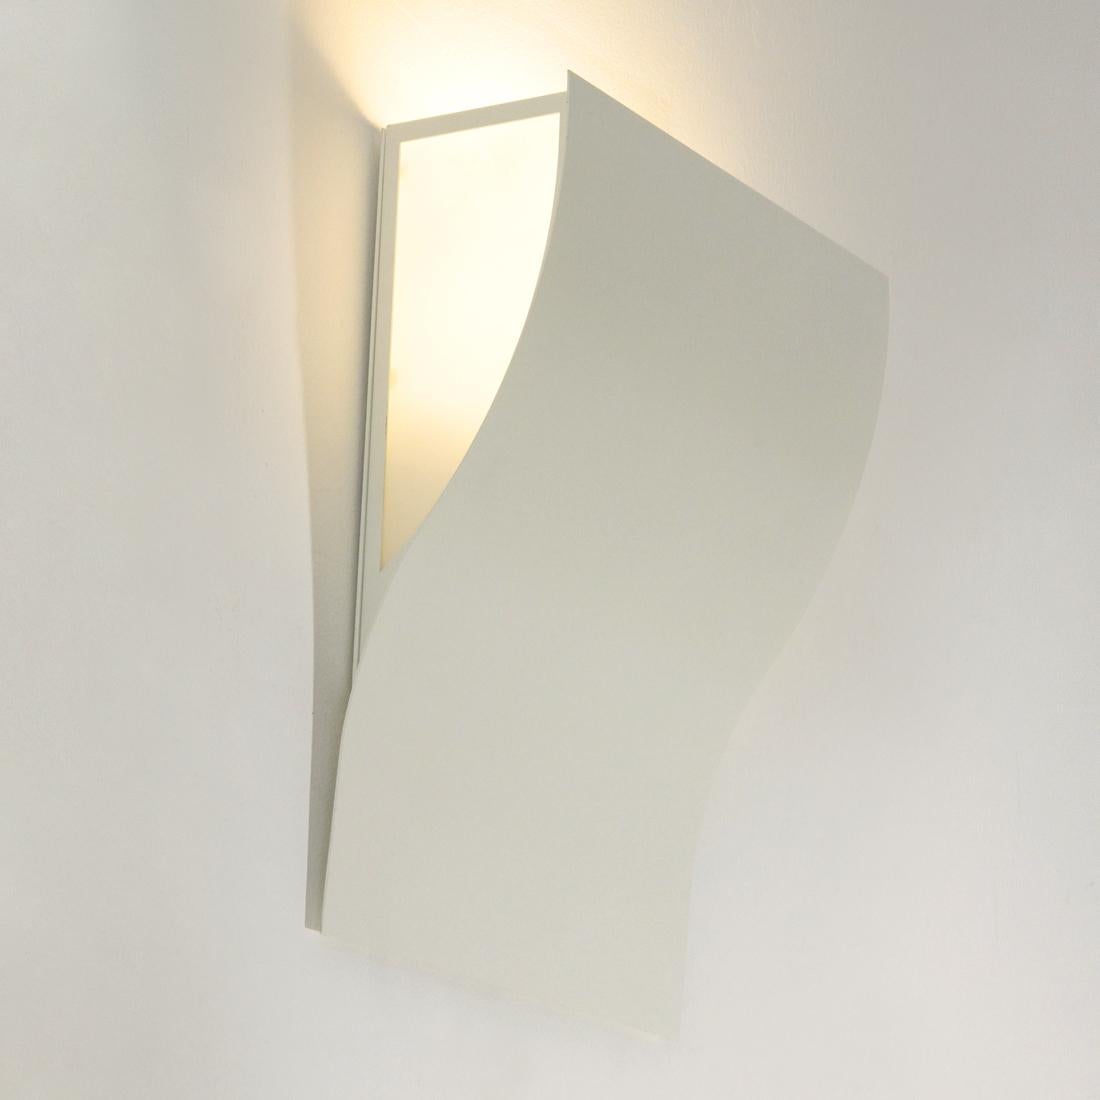 'Moki' wall lamp by Eugenio and Andrea Pamio for Oty Light, 2000s In Good Condition For Sale In Savona, IT